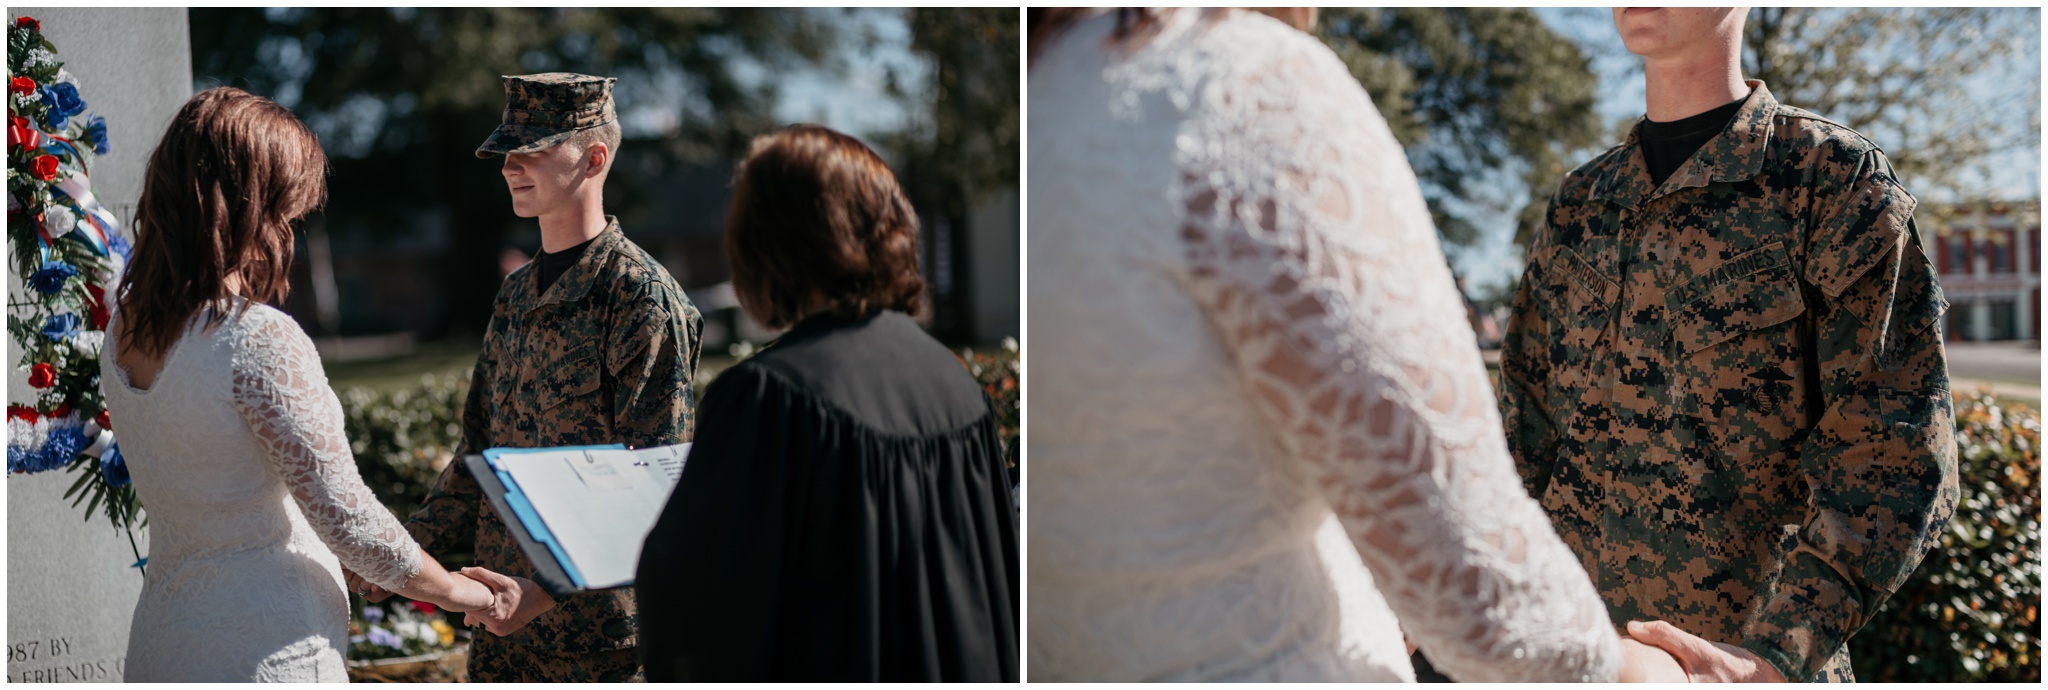 The Morros Photography Chicago Illinois Kaitlyn and Triston Courthouse Elopement_0388.jpg